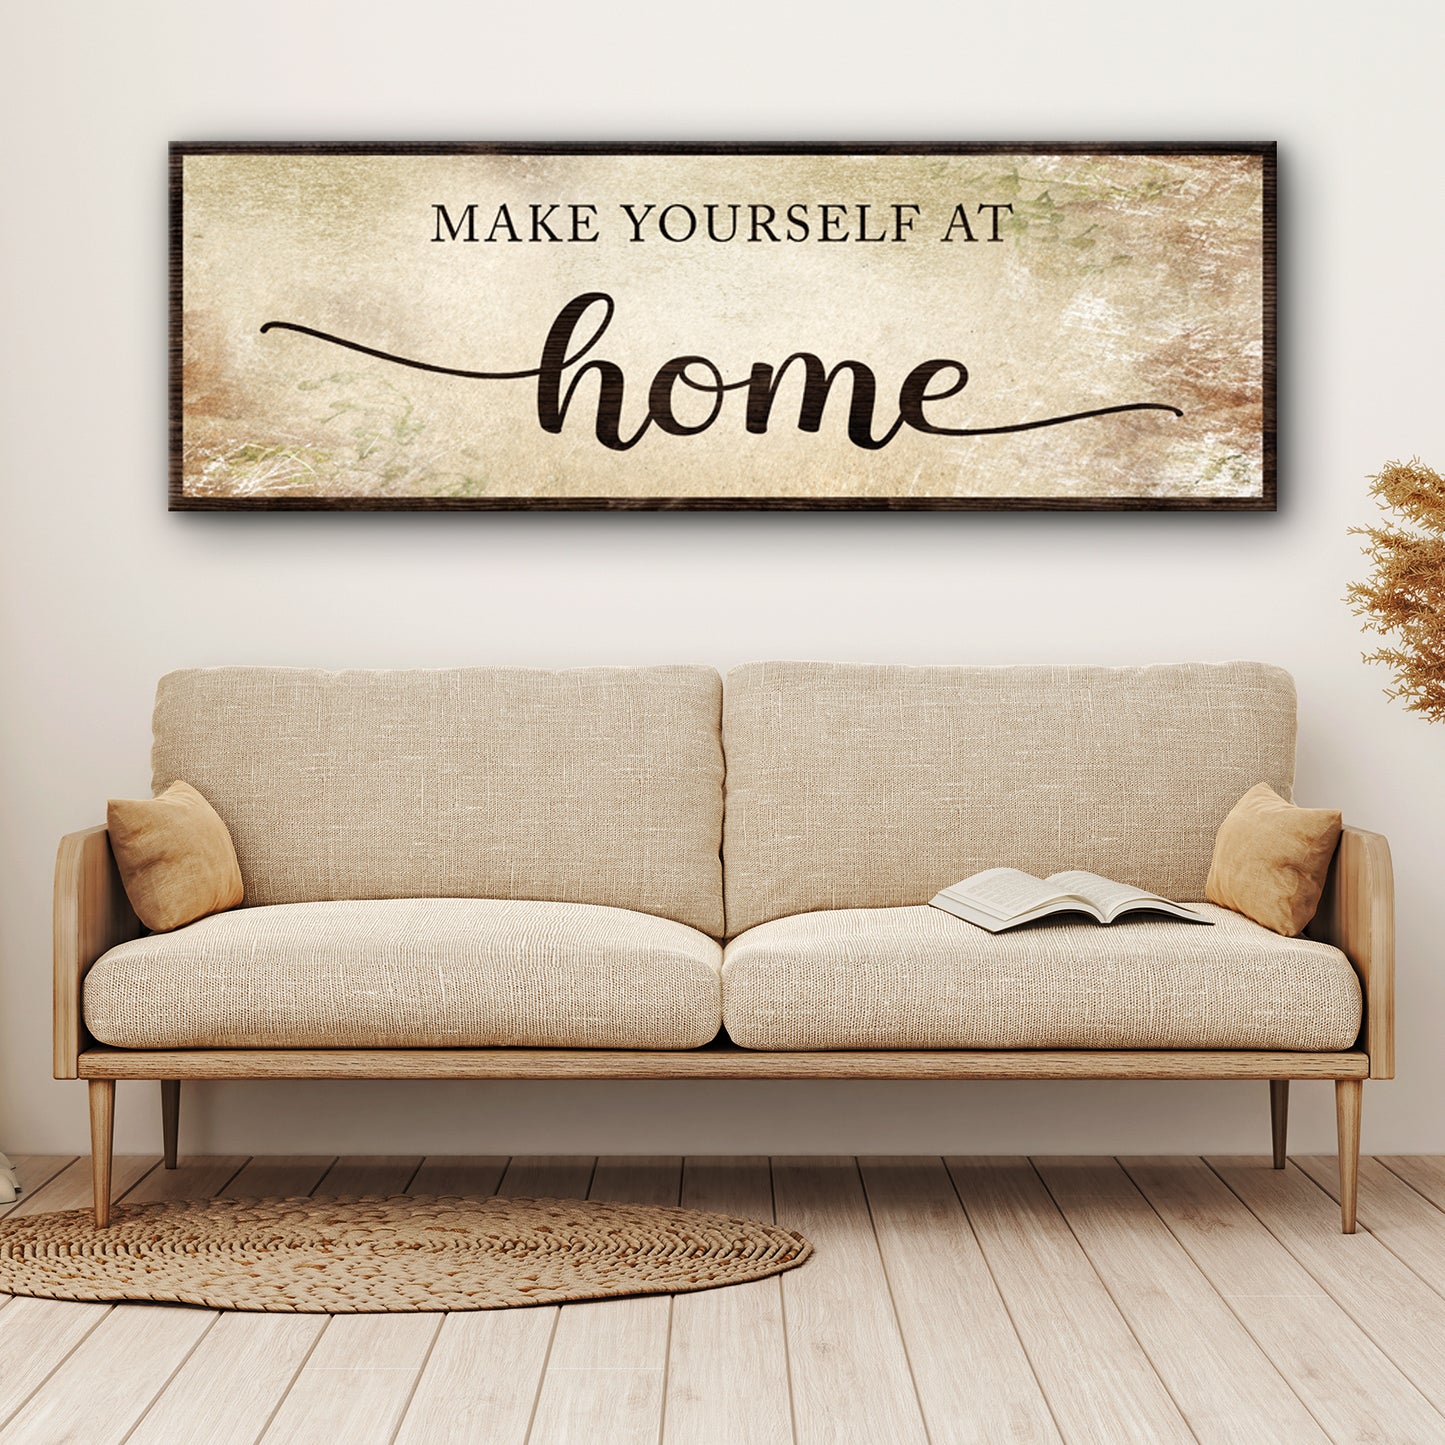 Make yourself at home Grunge Sign Style 2 - Image by Tailored Canvases